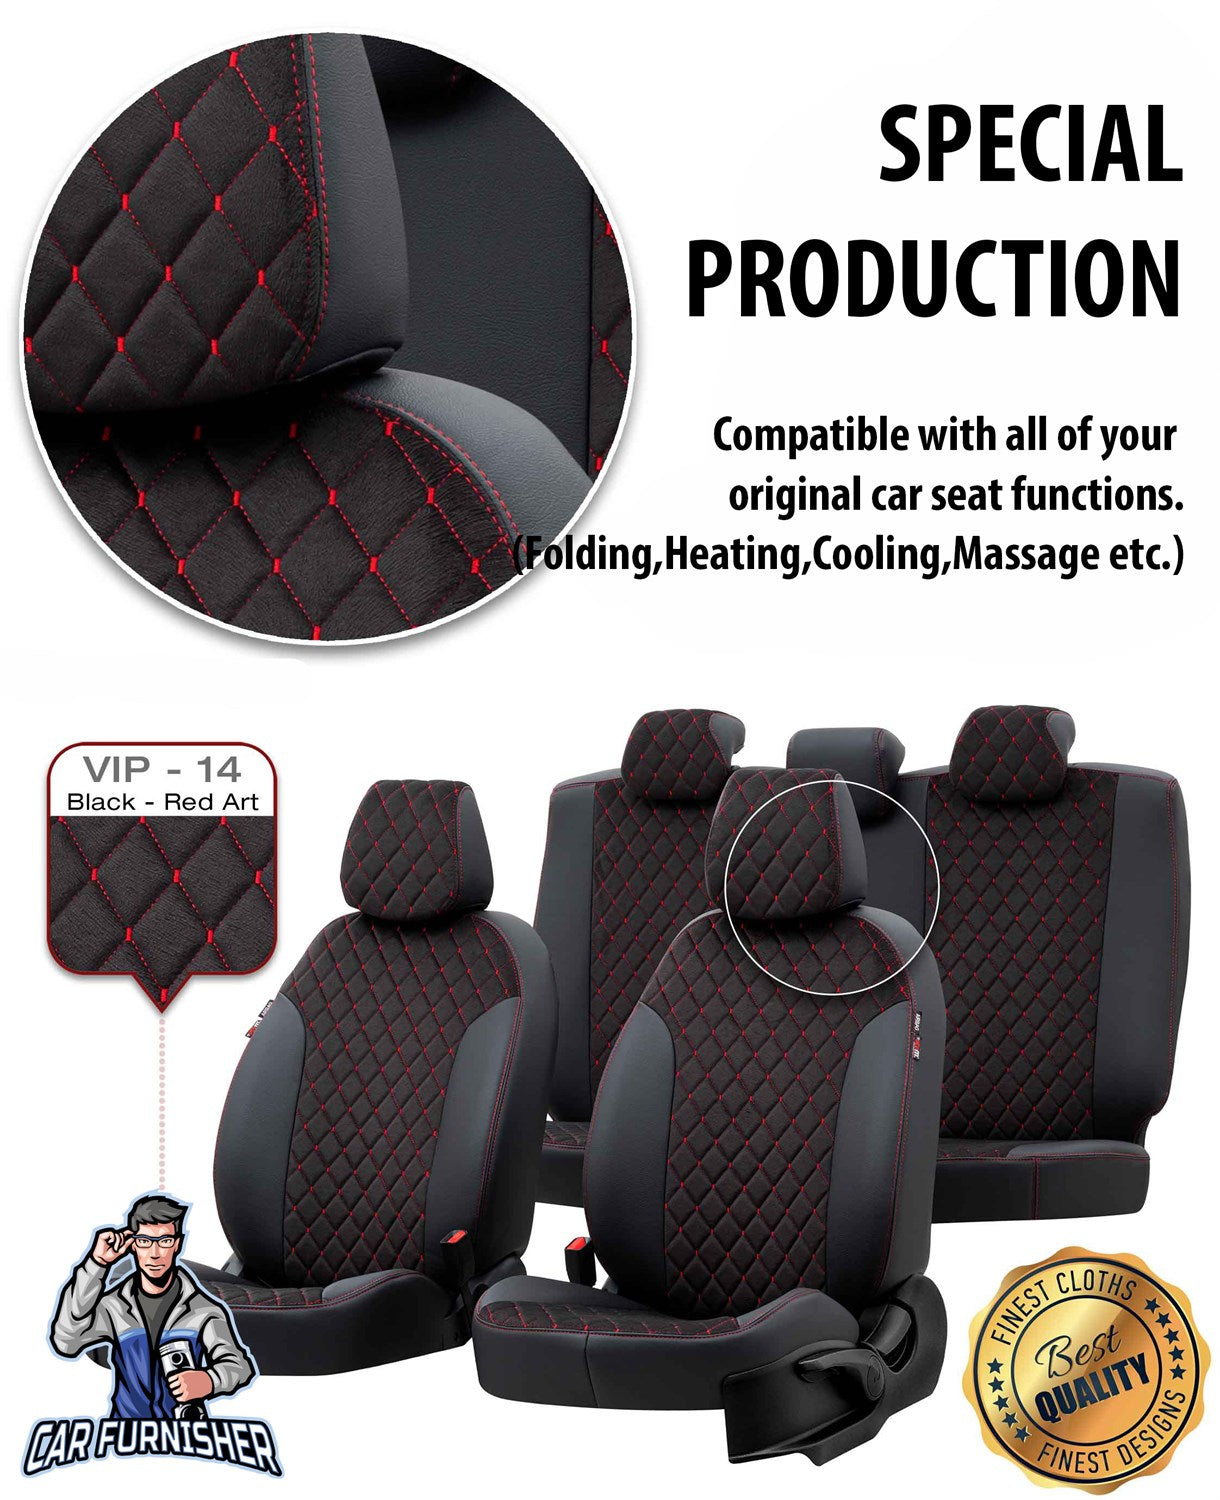 Volkswagen Bora Seat Cover Madrid Foal Feather Design Smoked Leather & Foal Feather